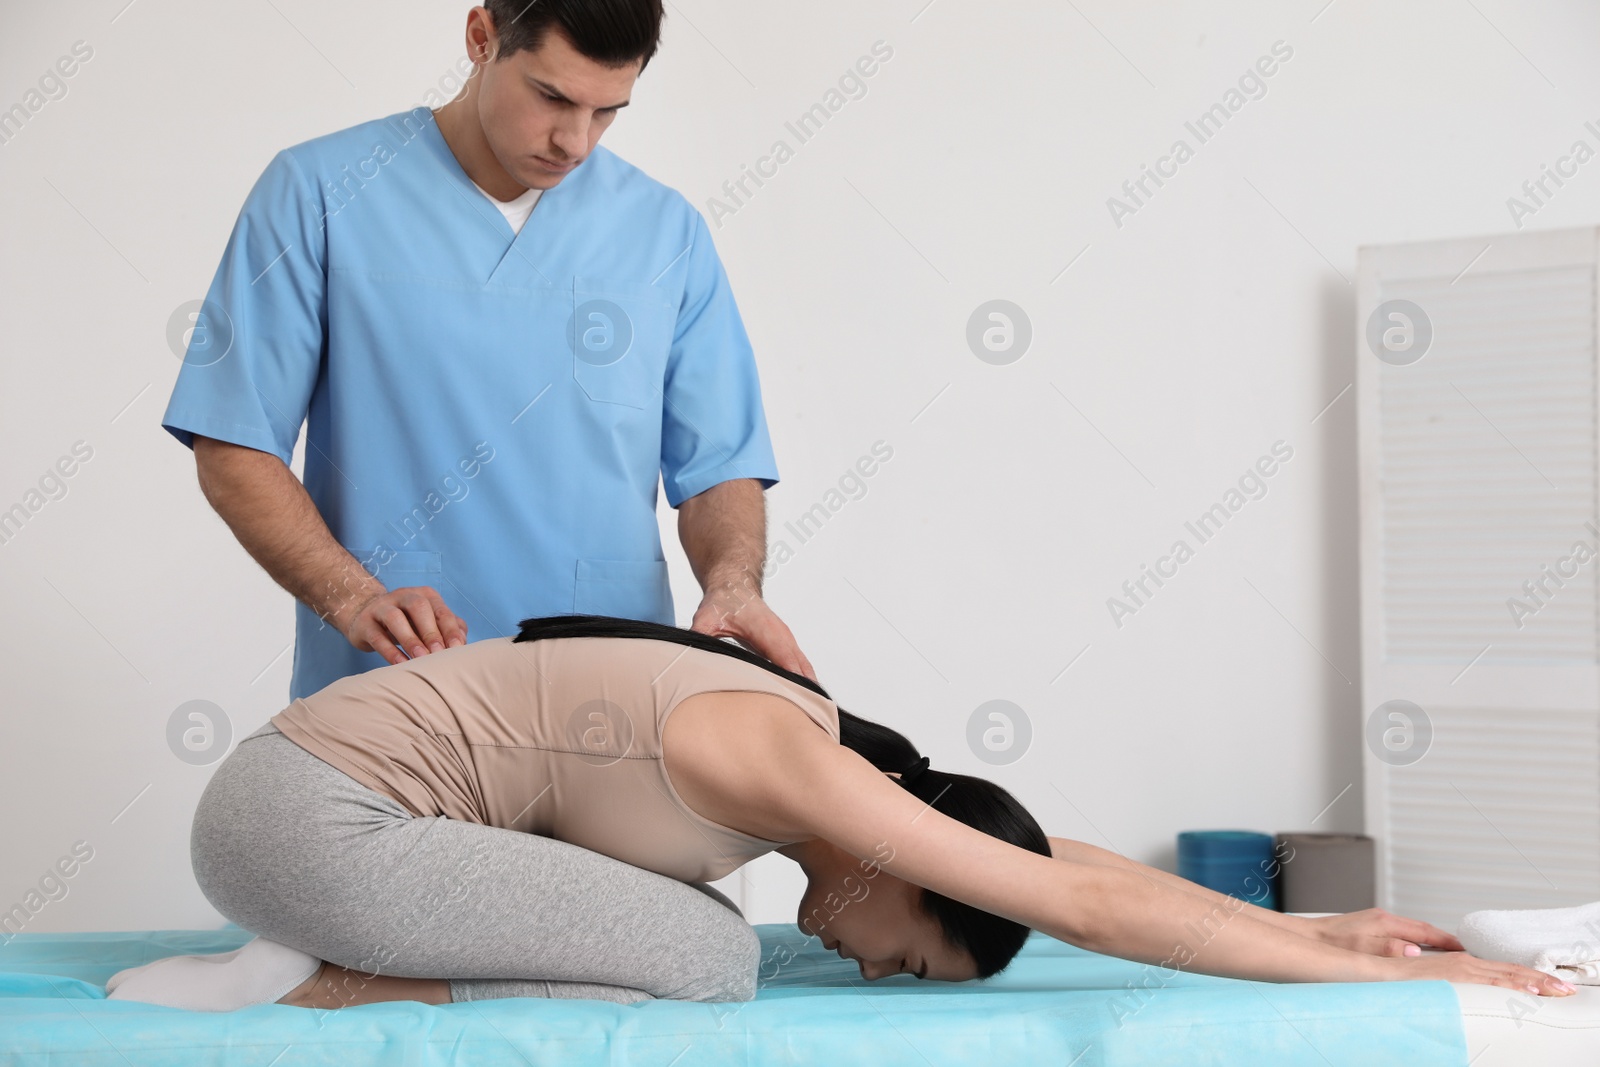 Photo of Orthopedist helping patient to do exercise in clinic, space for text Scoliosis treatment